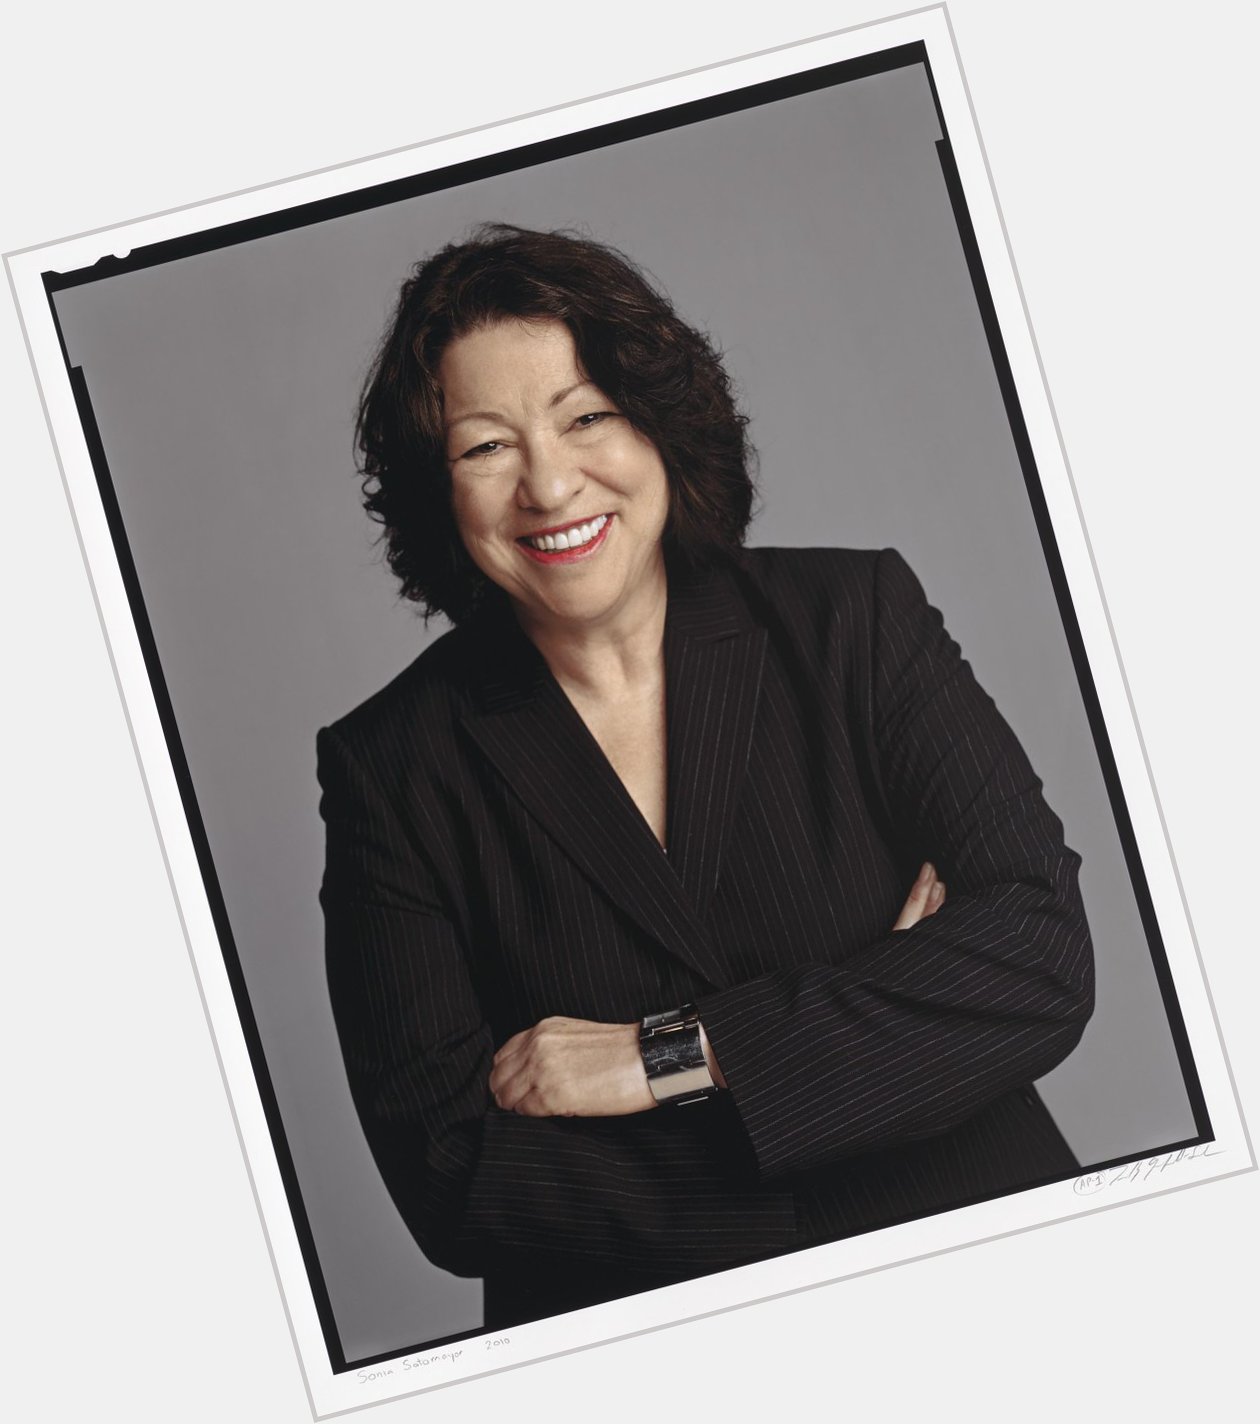   Happy birthday to justice Sonia Sotomayor! Read more on the NPG blog:  